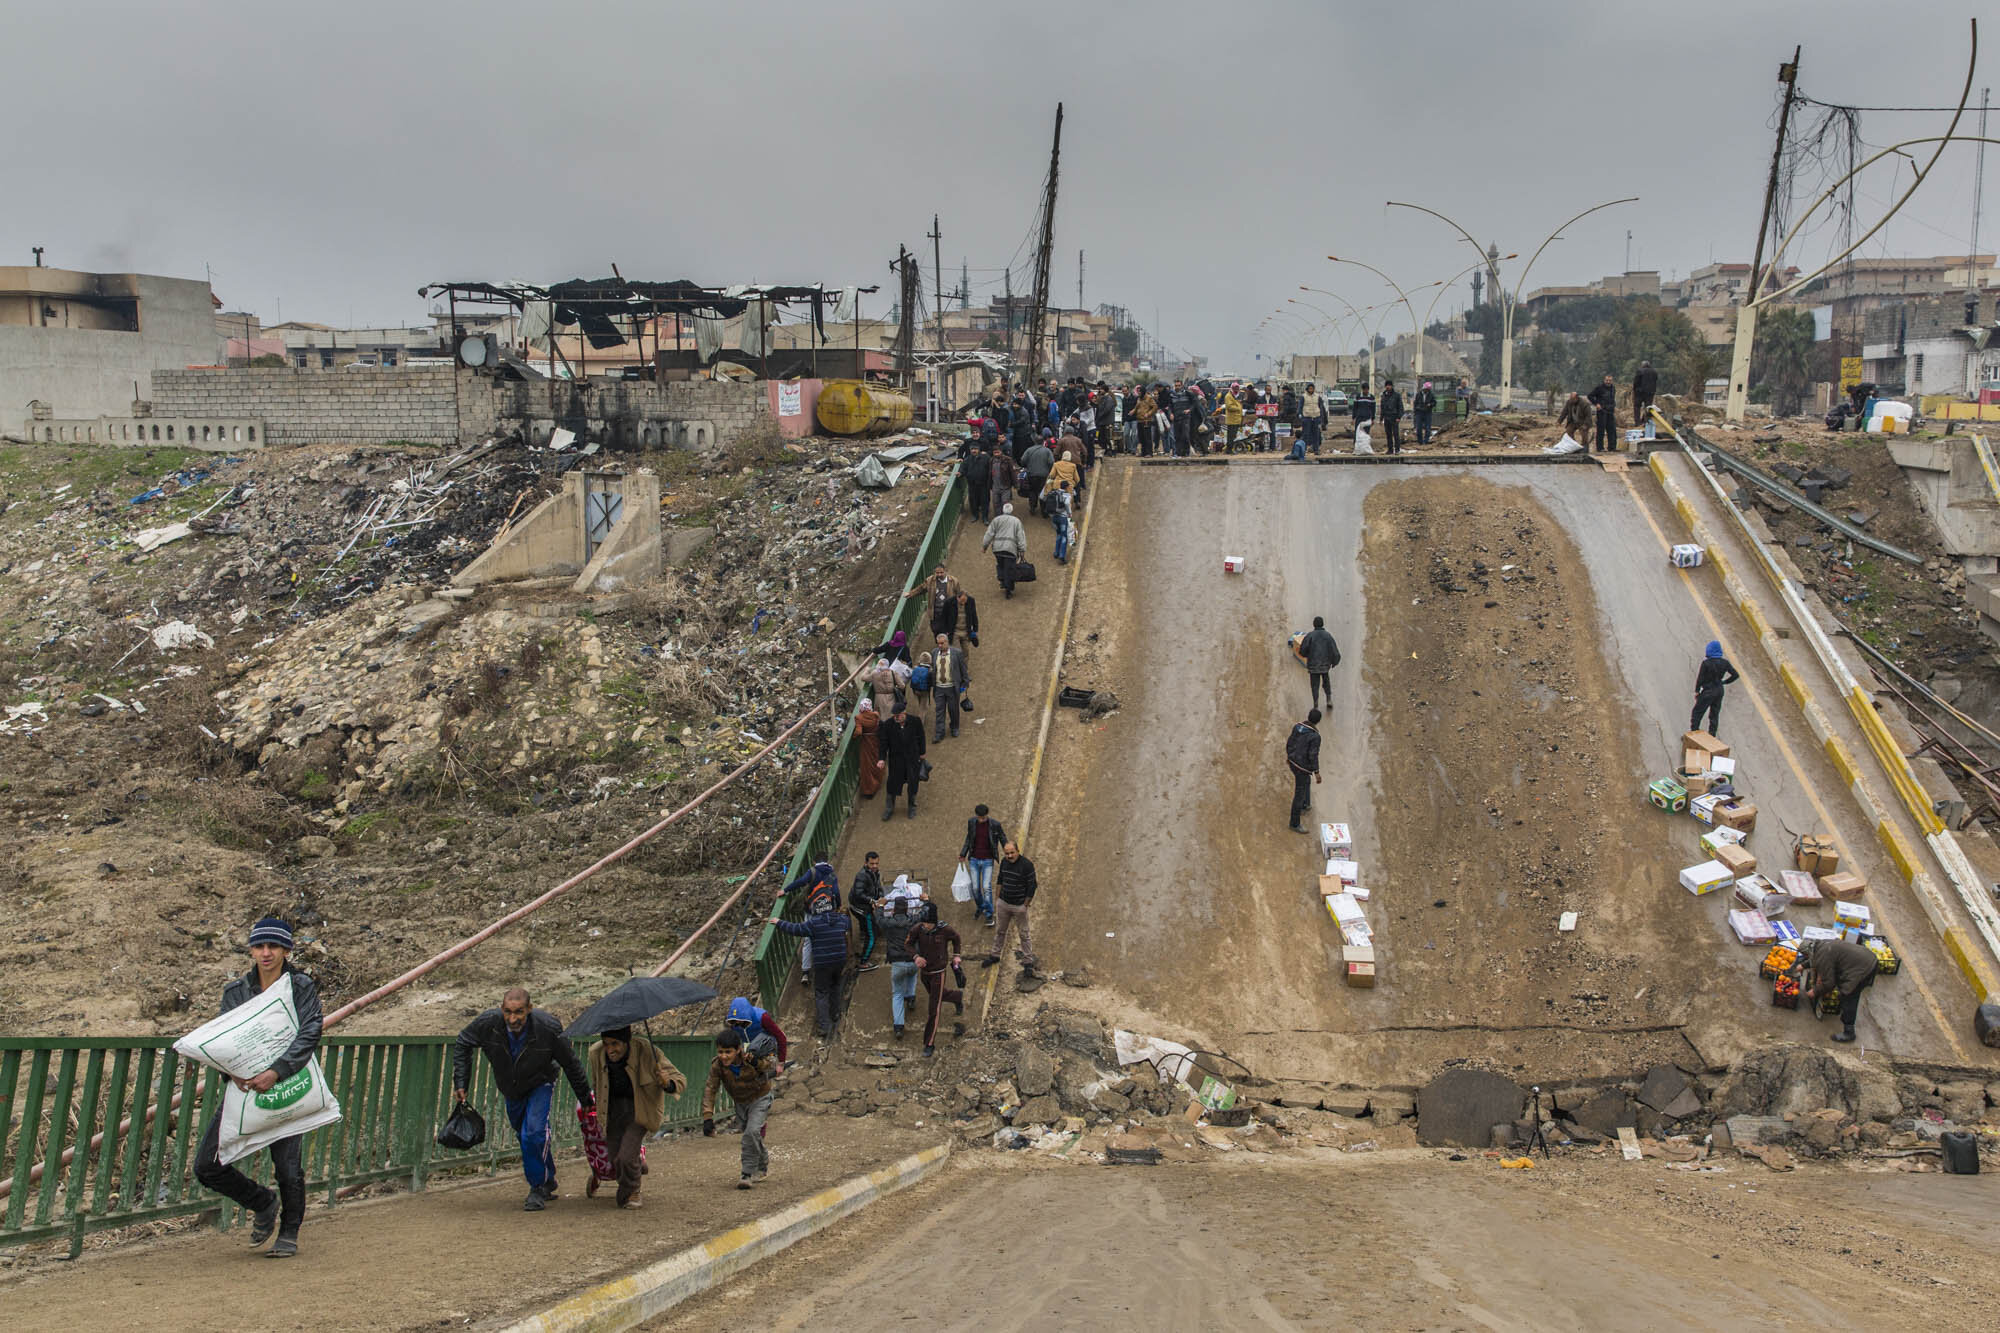  Some people fled the recently liberated Sukar neighbourhood, while others return having crossed a destroyed bridge that connects the area to the rest of the east Mosul. Iraq - January 2017 